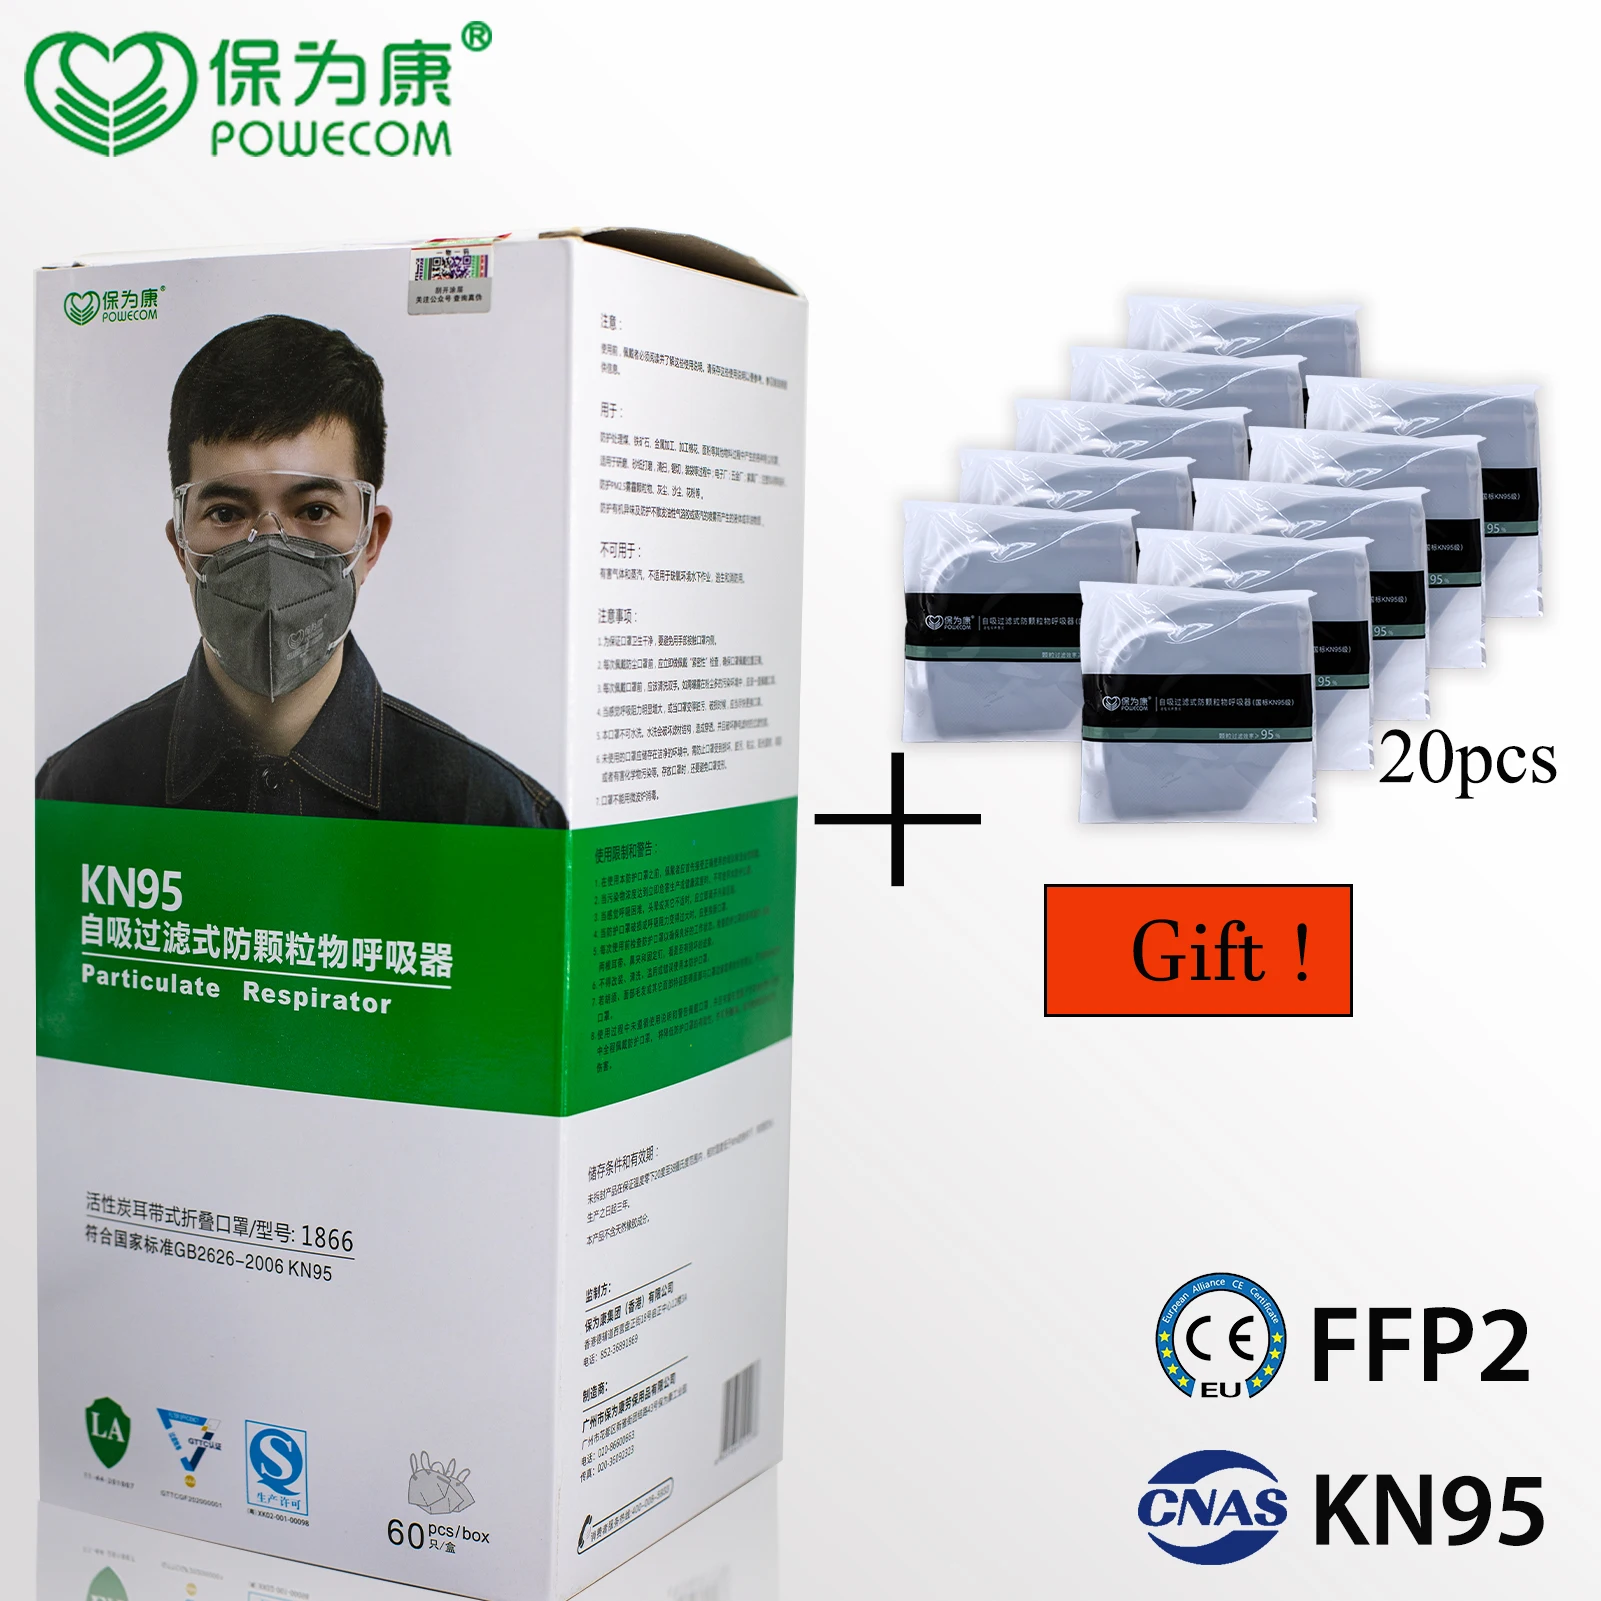 

Powecom 5 Layers FFP2 Reusable Mask fpp2 KN95 Masks Respirator Activated Carbon Mask Anti-fog Dustproof Mouth Muffle cover